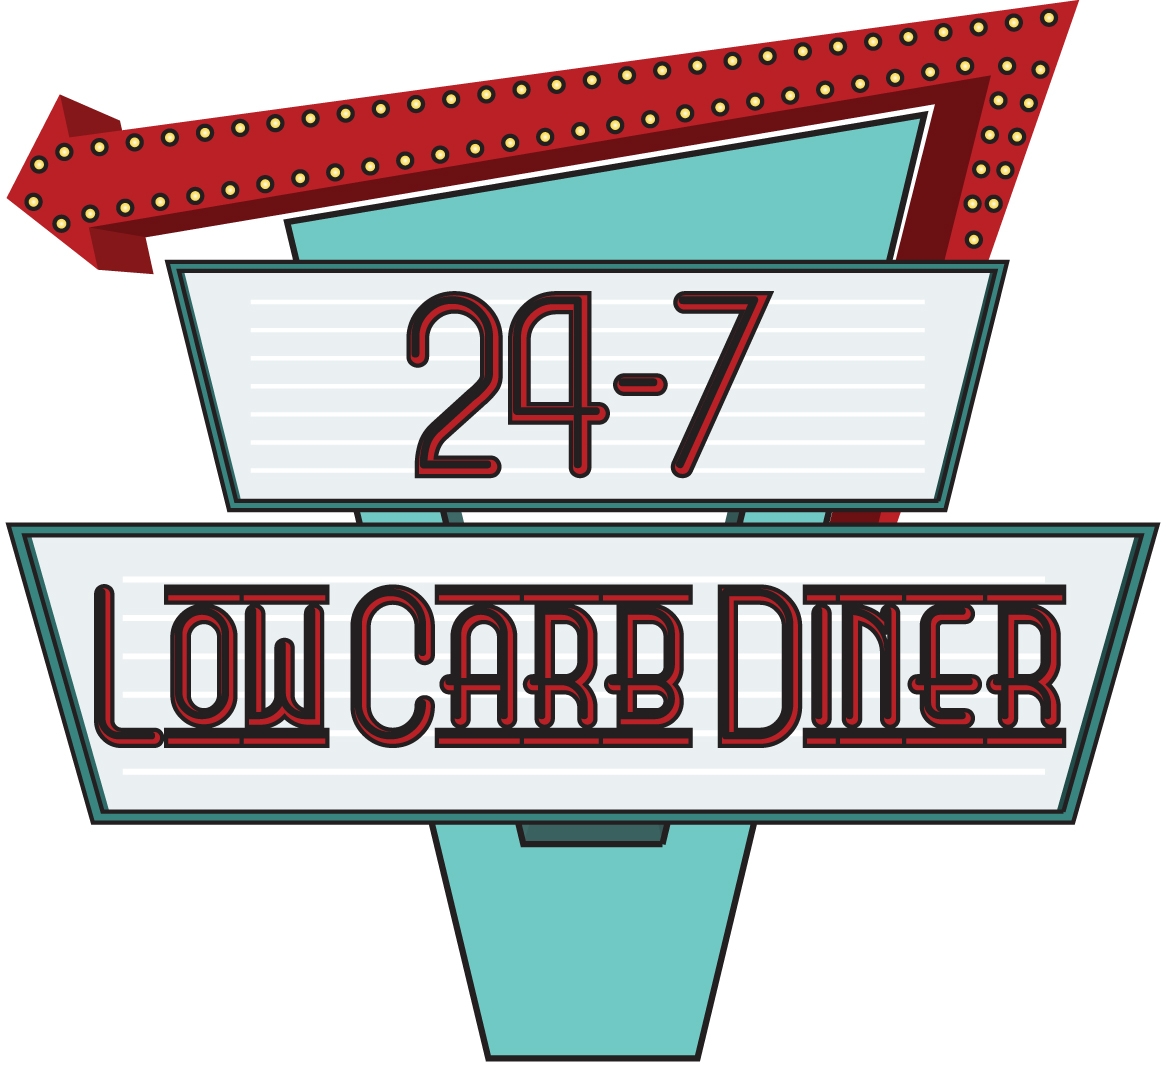 14 Kb Jpeg Clipart Picture Of A Retro Diner Sign Http Www Clipartguide